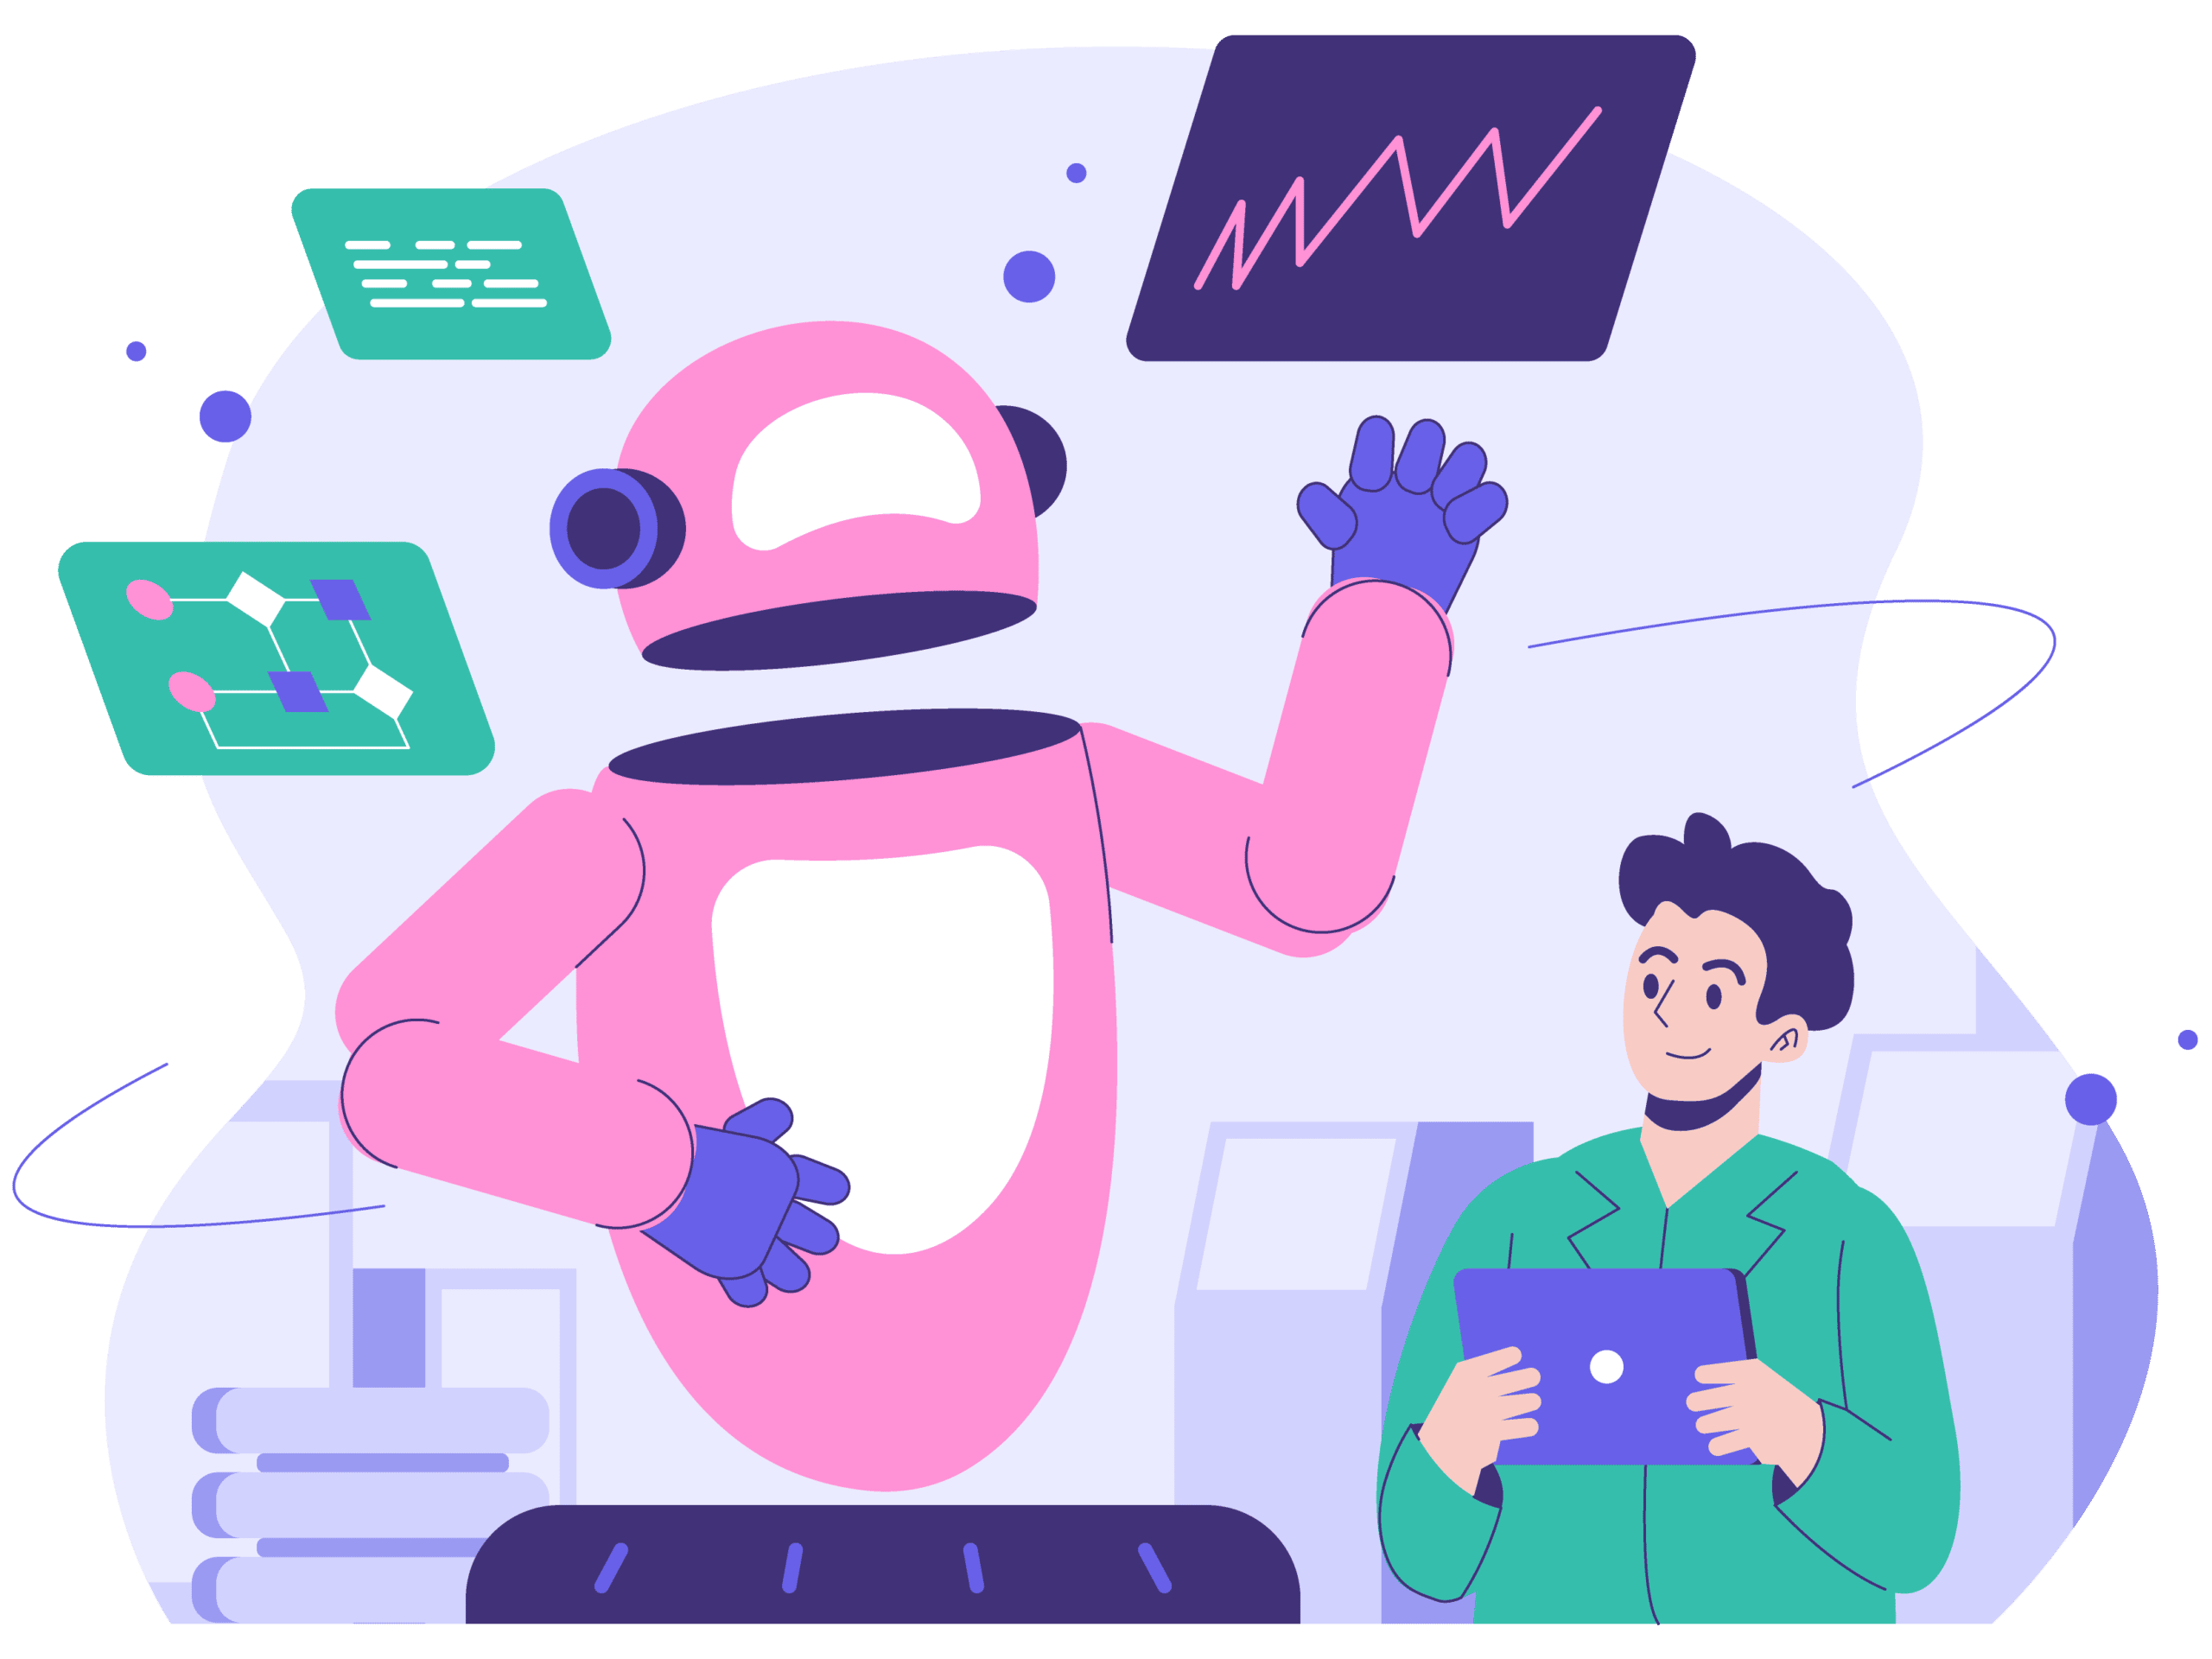 Flat illustration of a man interacting with a pink robot